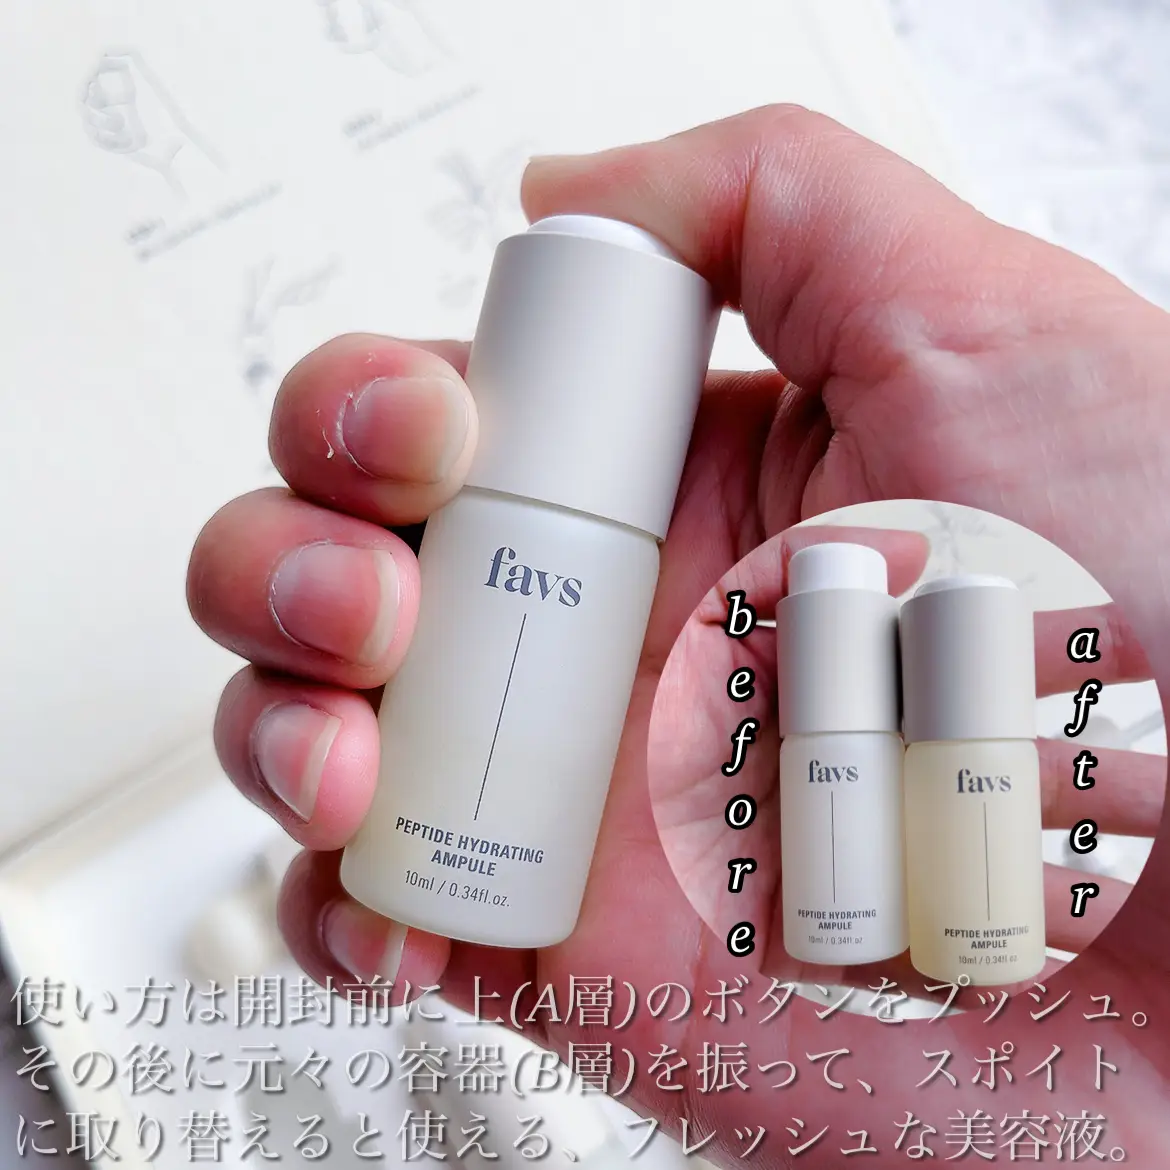 Serum that can be used safely even on sensitive skin / | Gallery